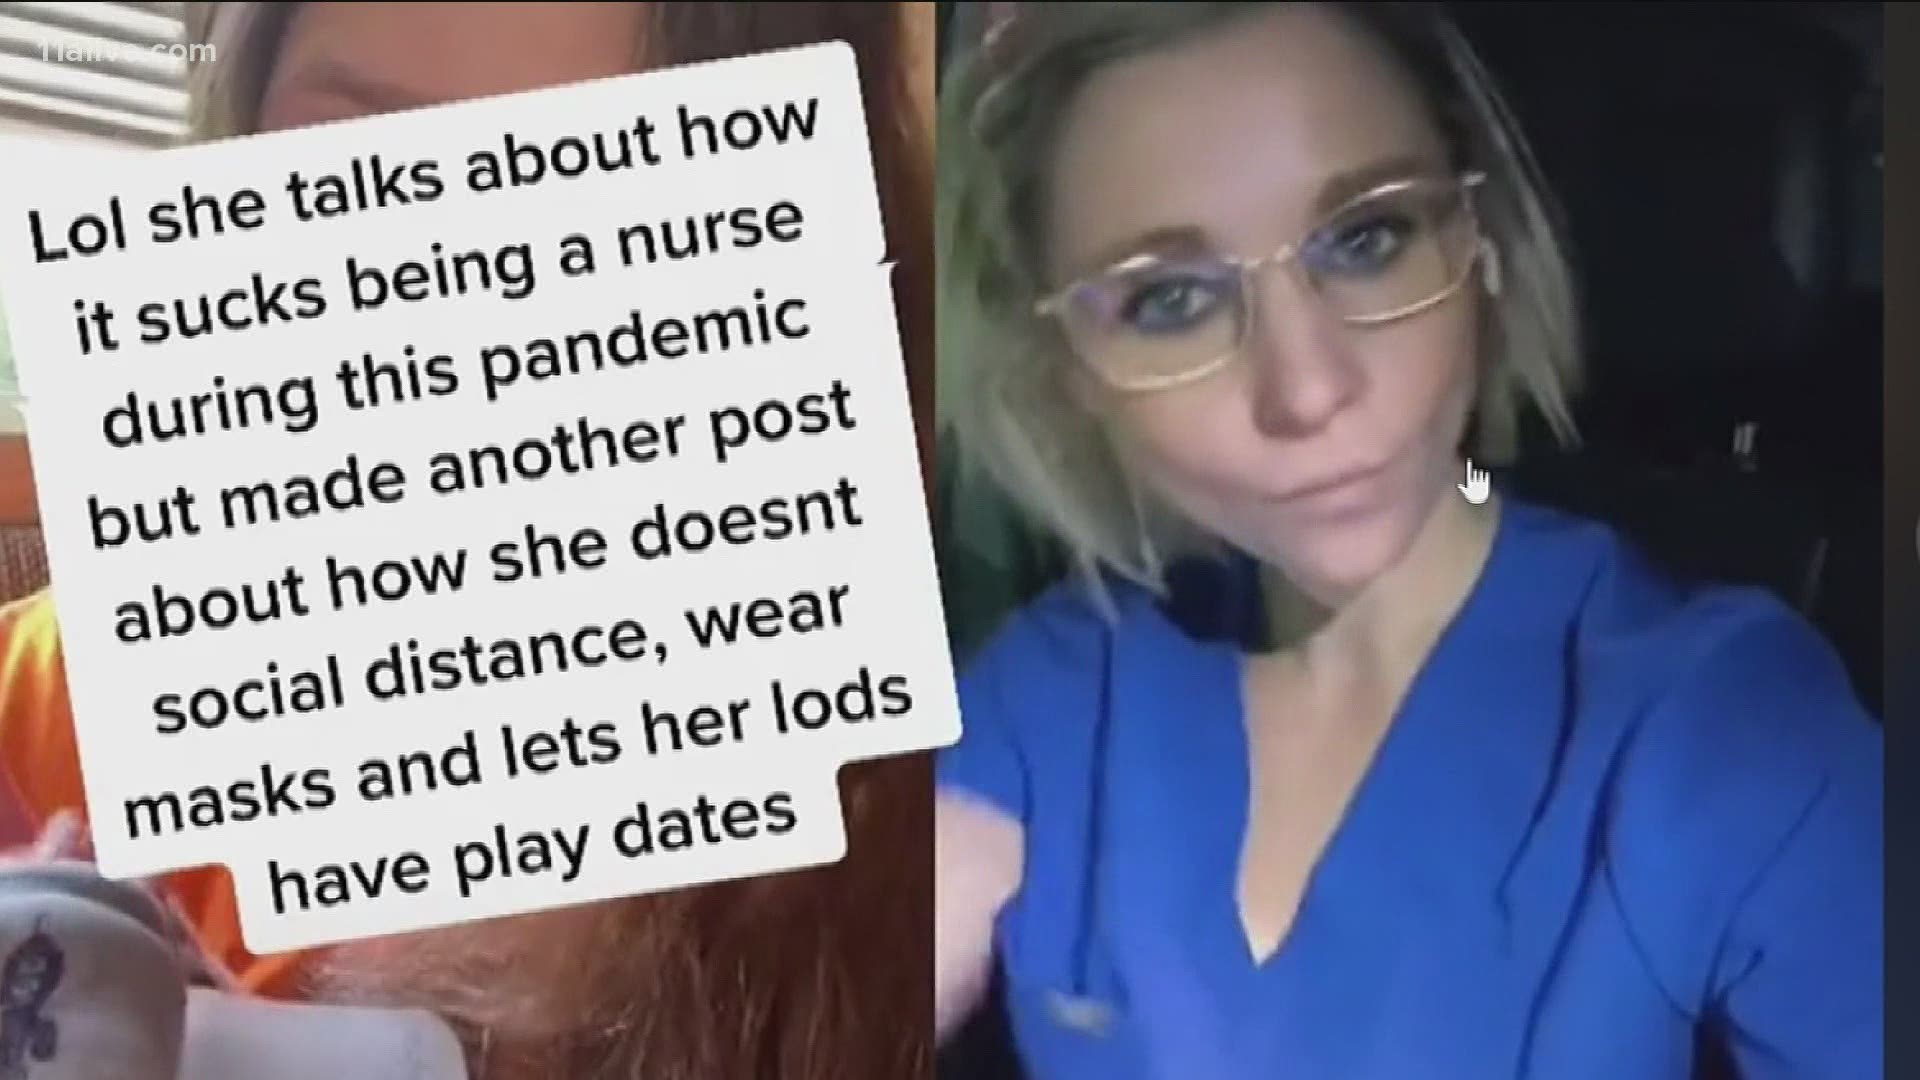 The nurse said in the video that she doesn't wear a mask in public and still travels.